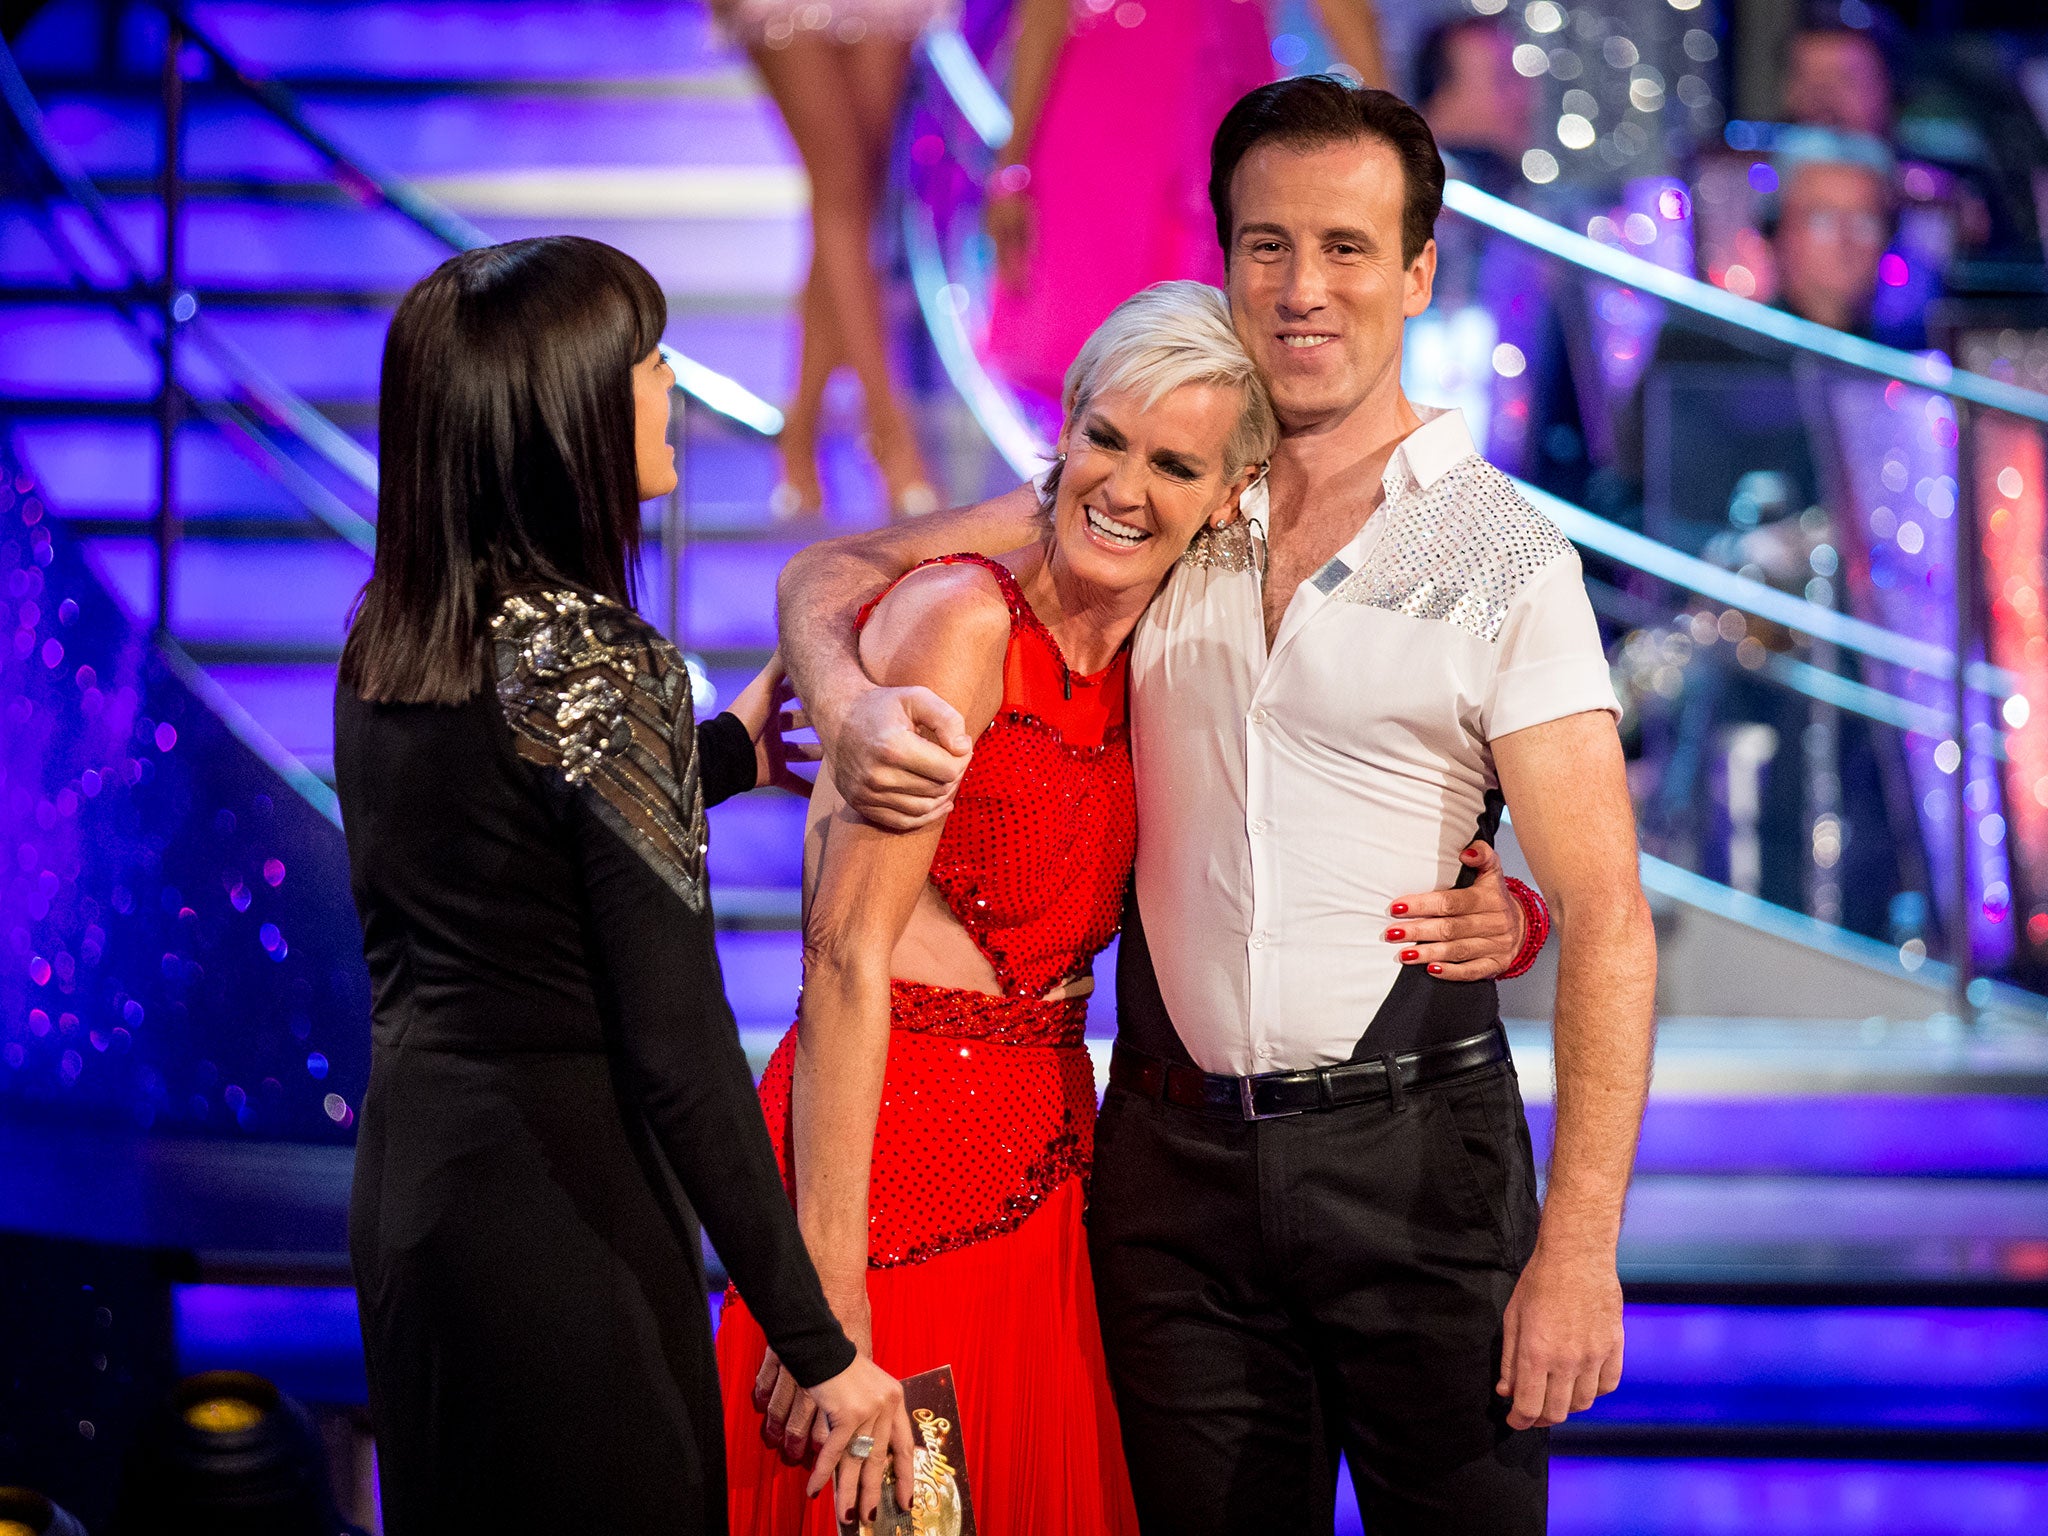 Tennis player Andy Murray's mum Judy has been paired with Anton du Beke for Strictly Come Dancing. 'I'm absolutely delighted,' she said.